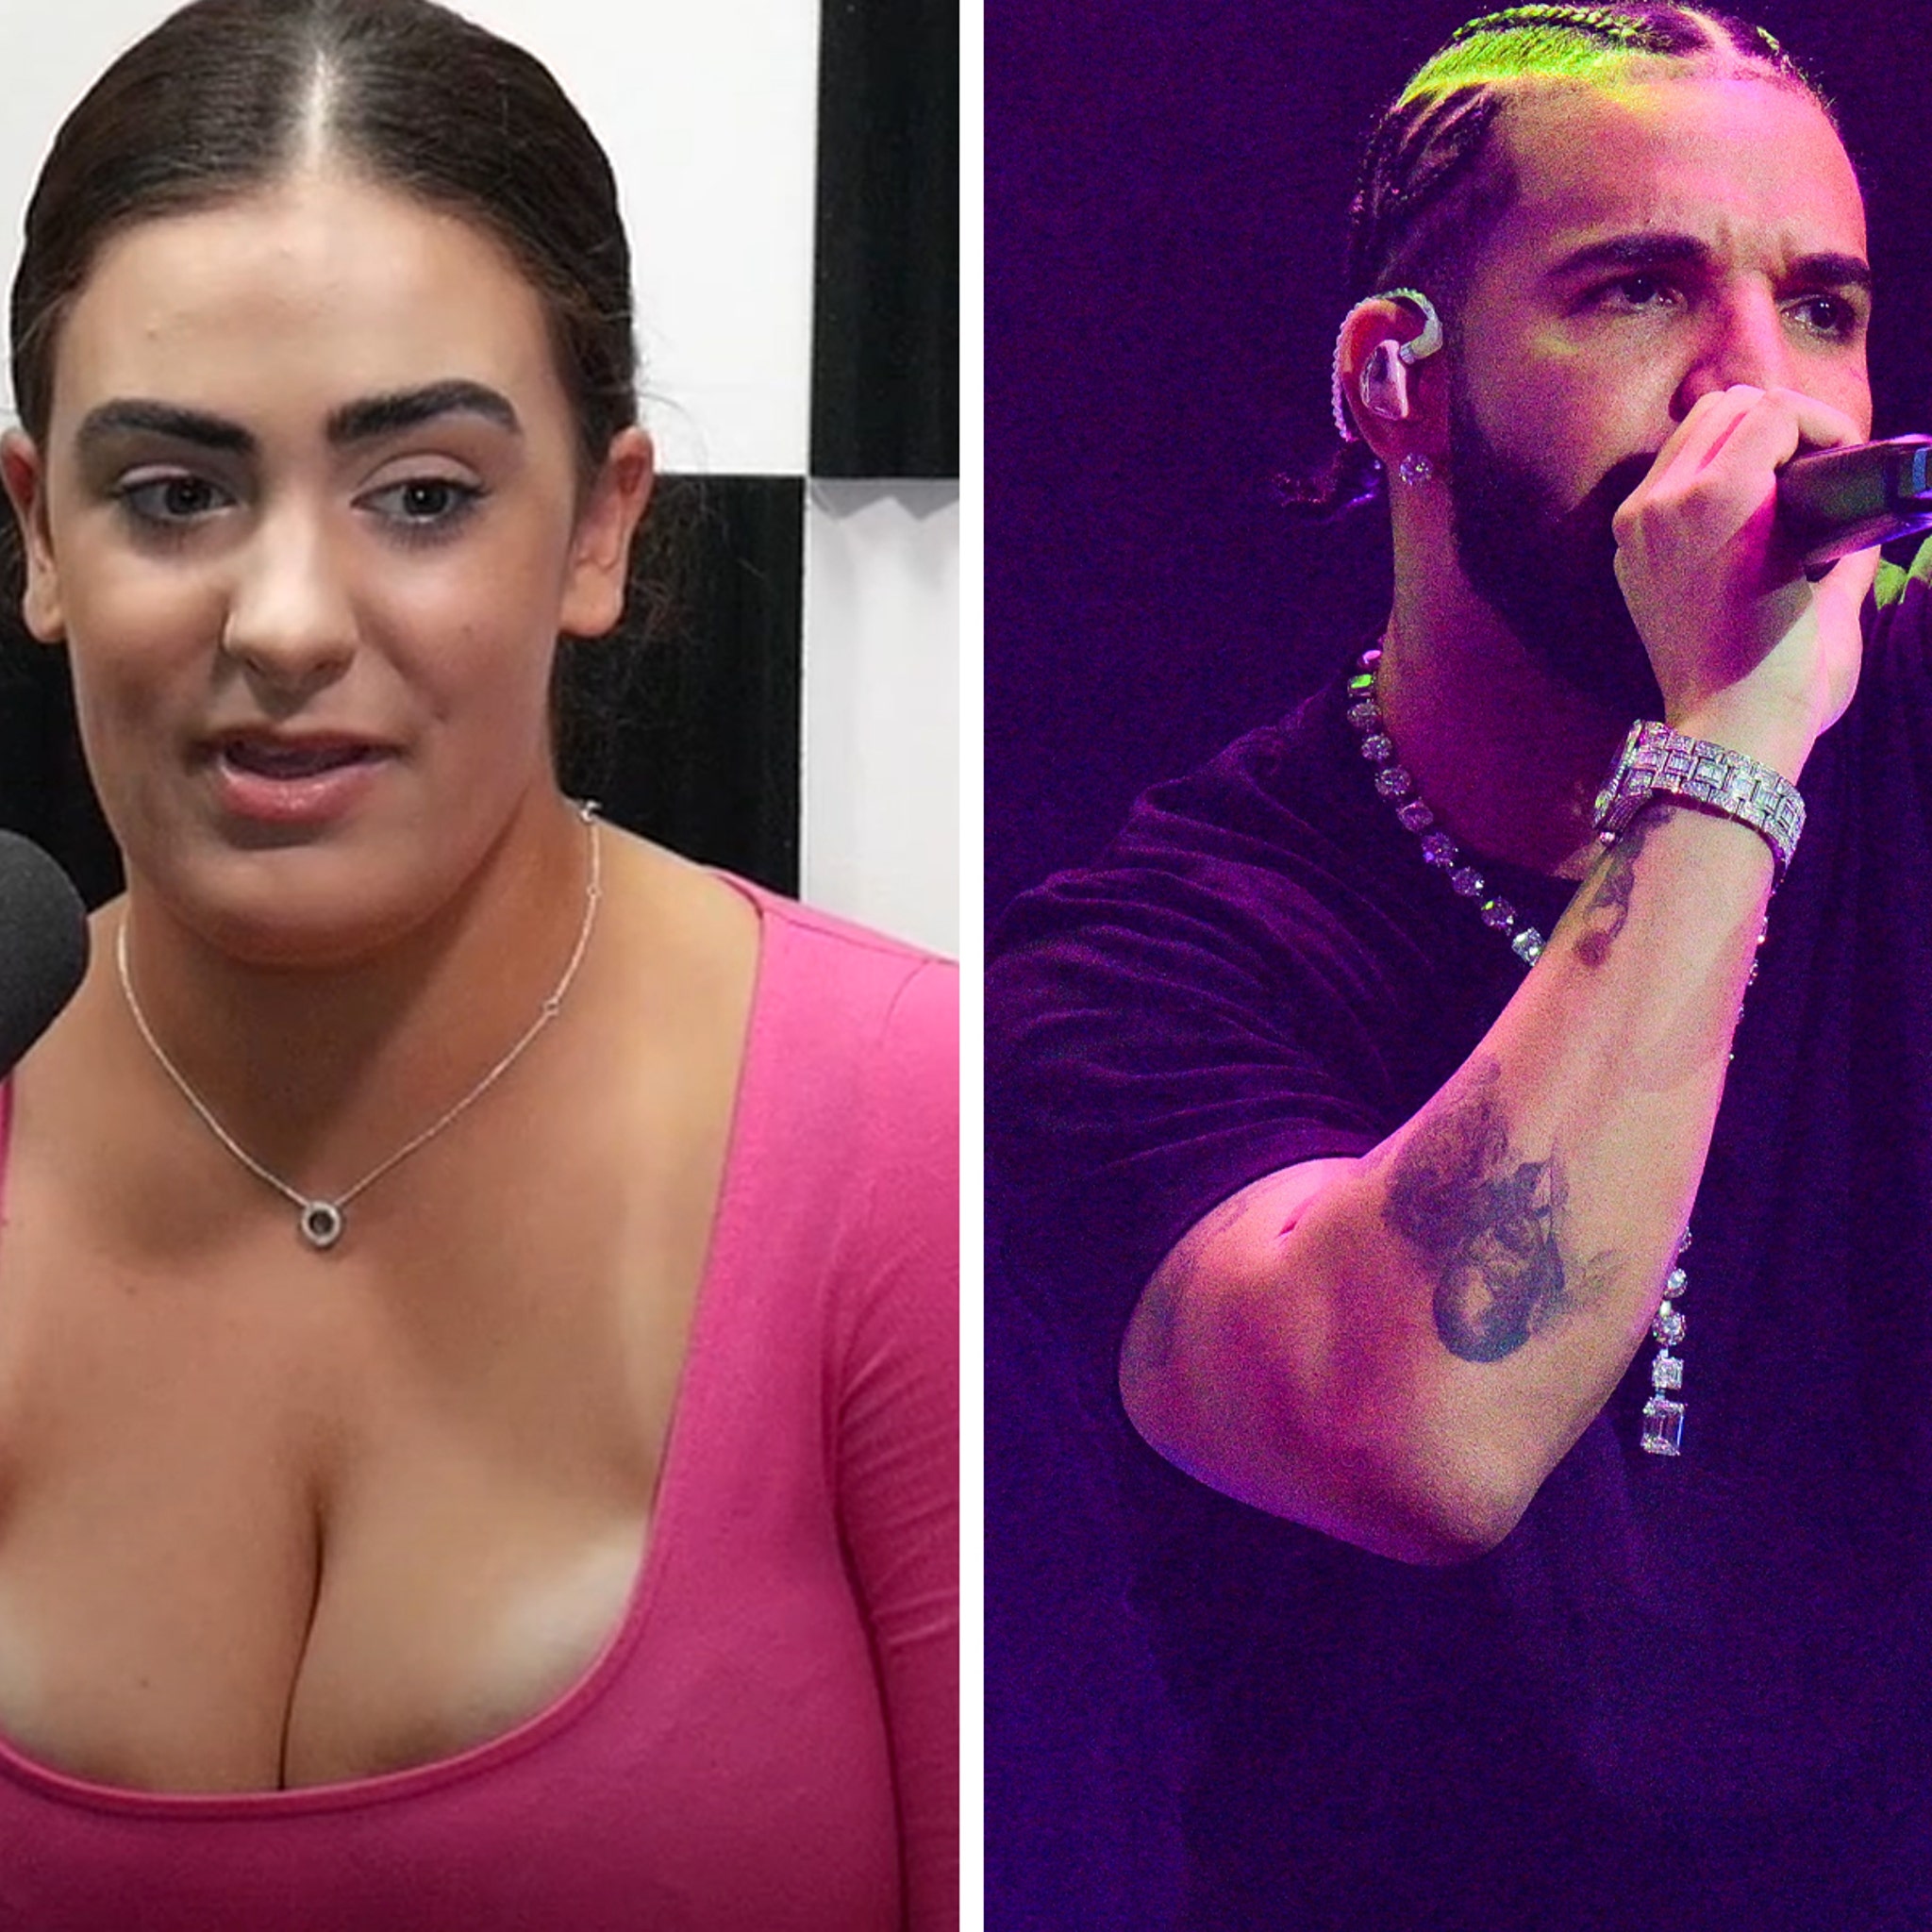 Drake Fan Who Threw 36G Bra On Stage Reveals Private DMs With